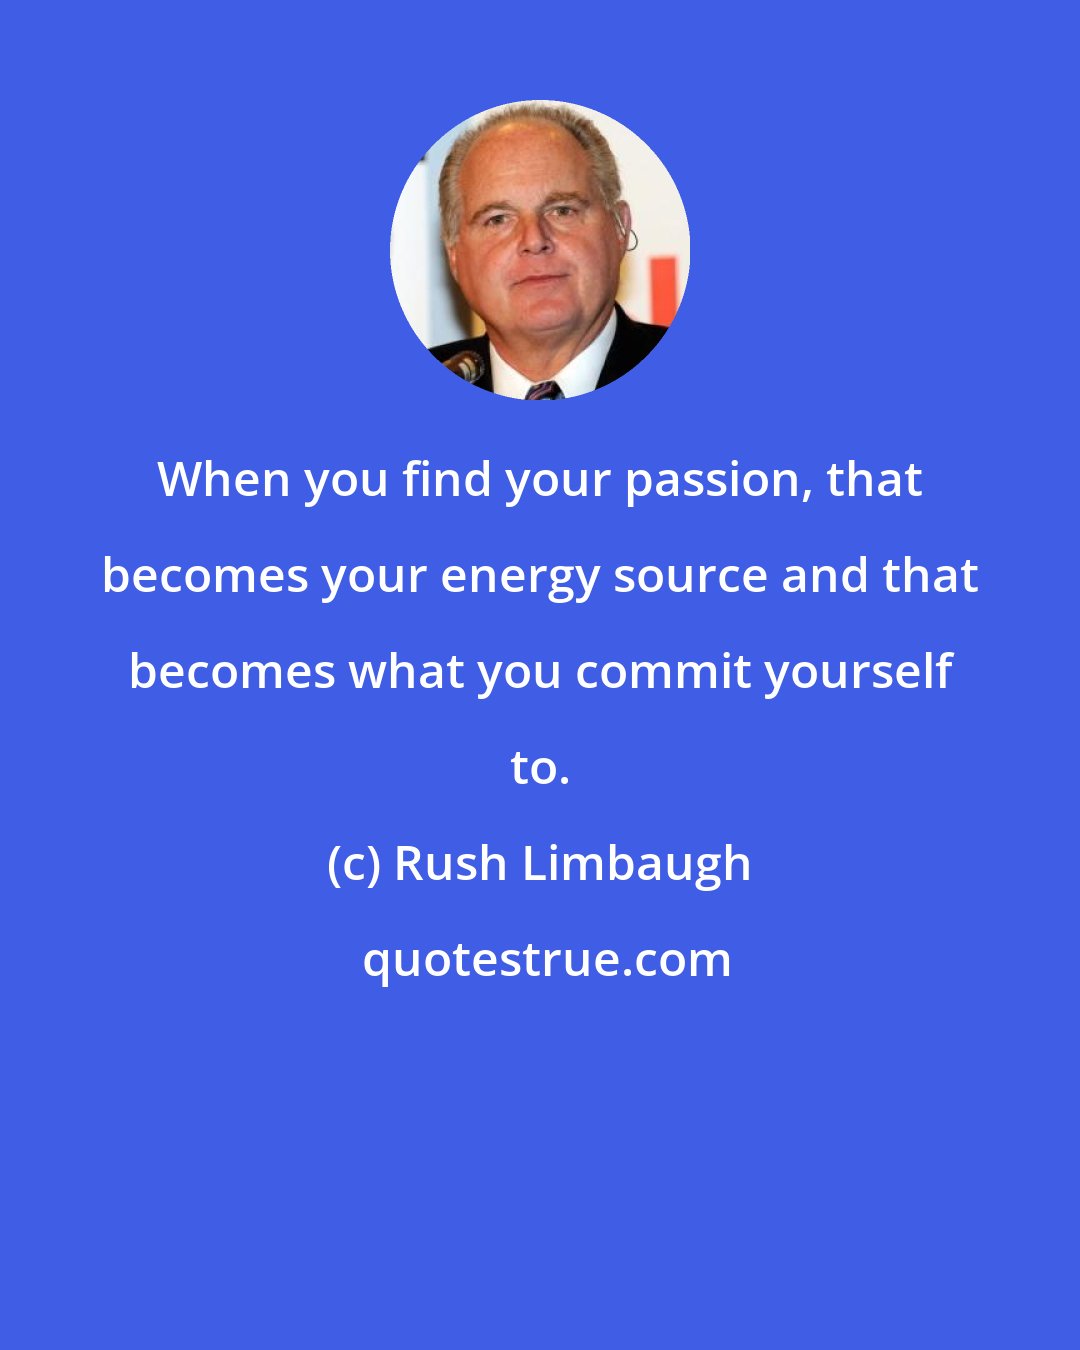 Rush Limbaugh: When you find your passion, that becomes your energy source and that becomes what you commit yourself to.